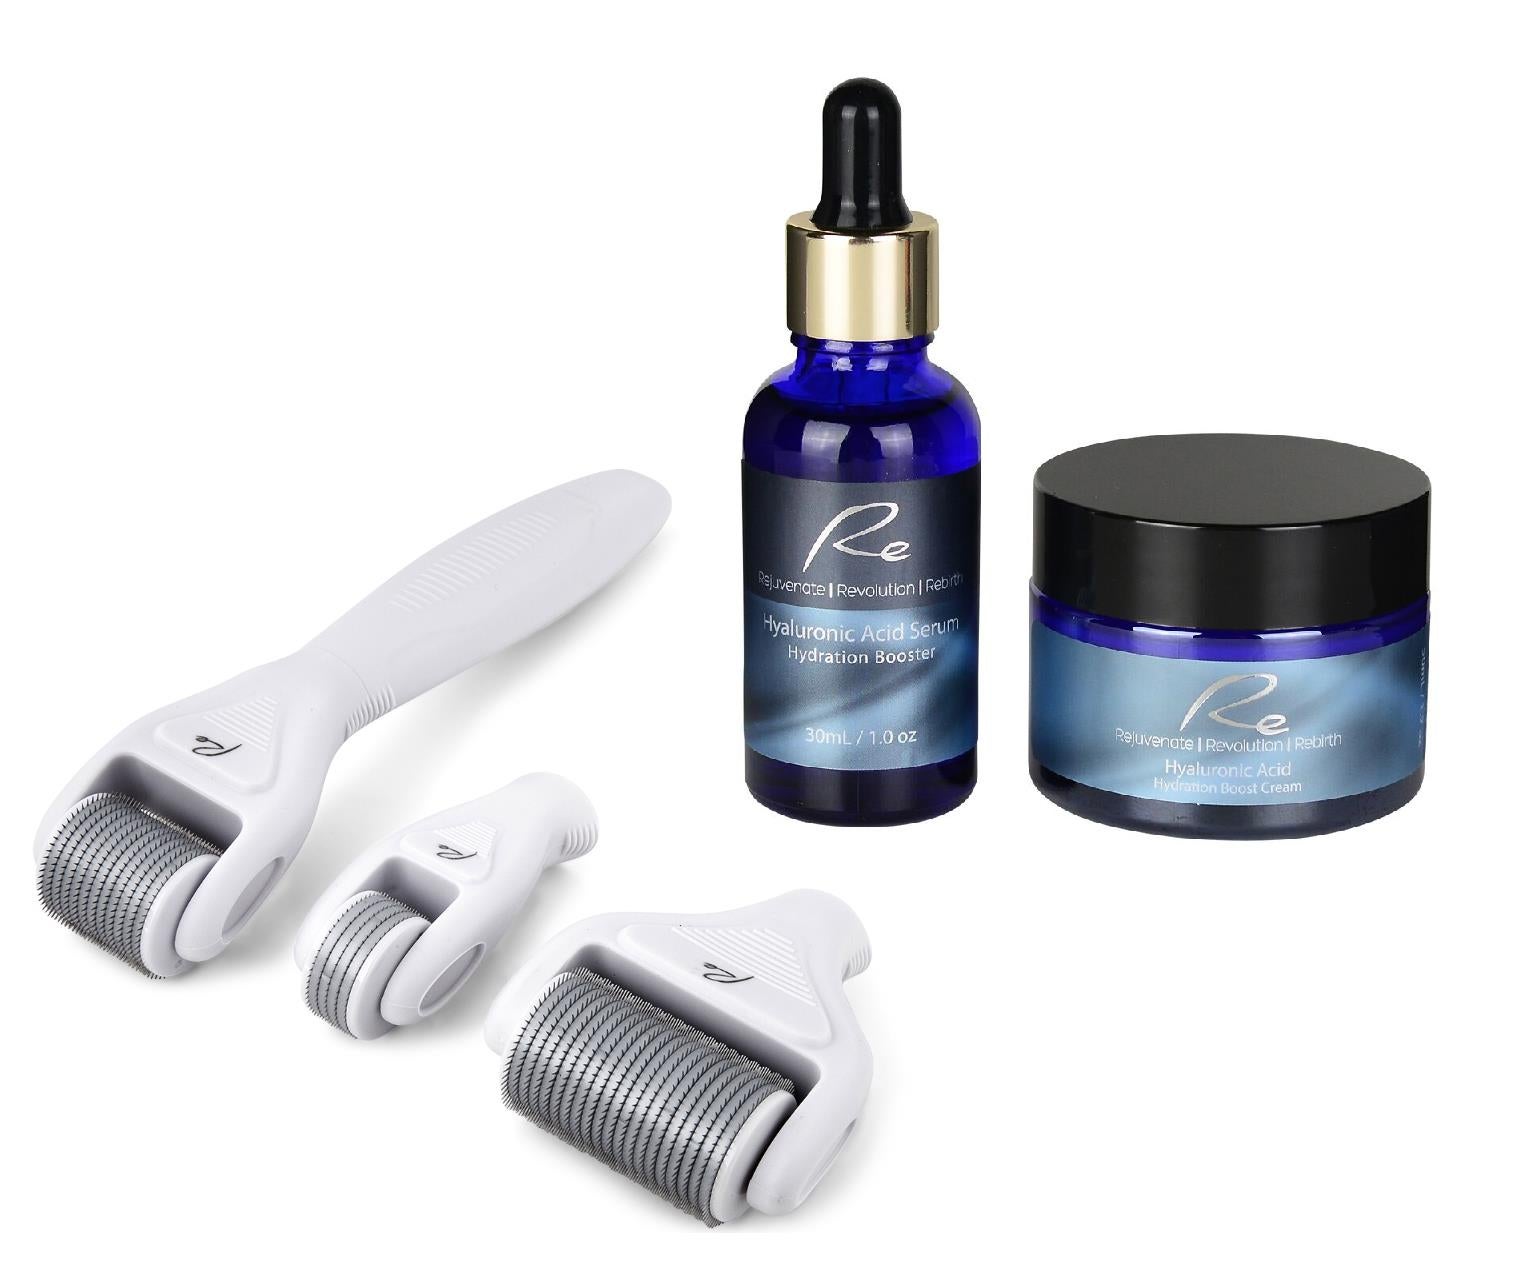 Re Derma Roller All In One Set + Hyaluronic Acid Hydration Boost Face Serum (30mL) + Cream (50mL)